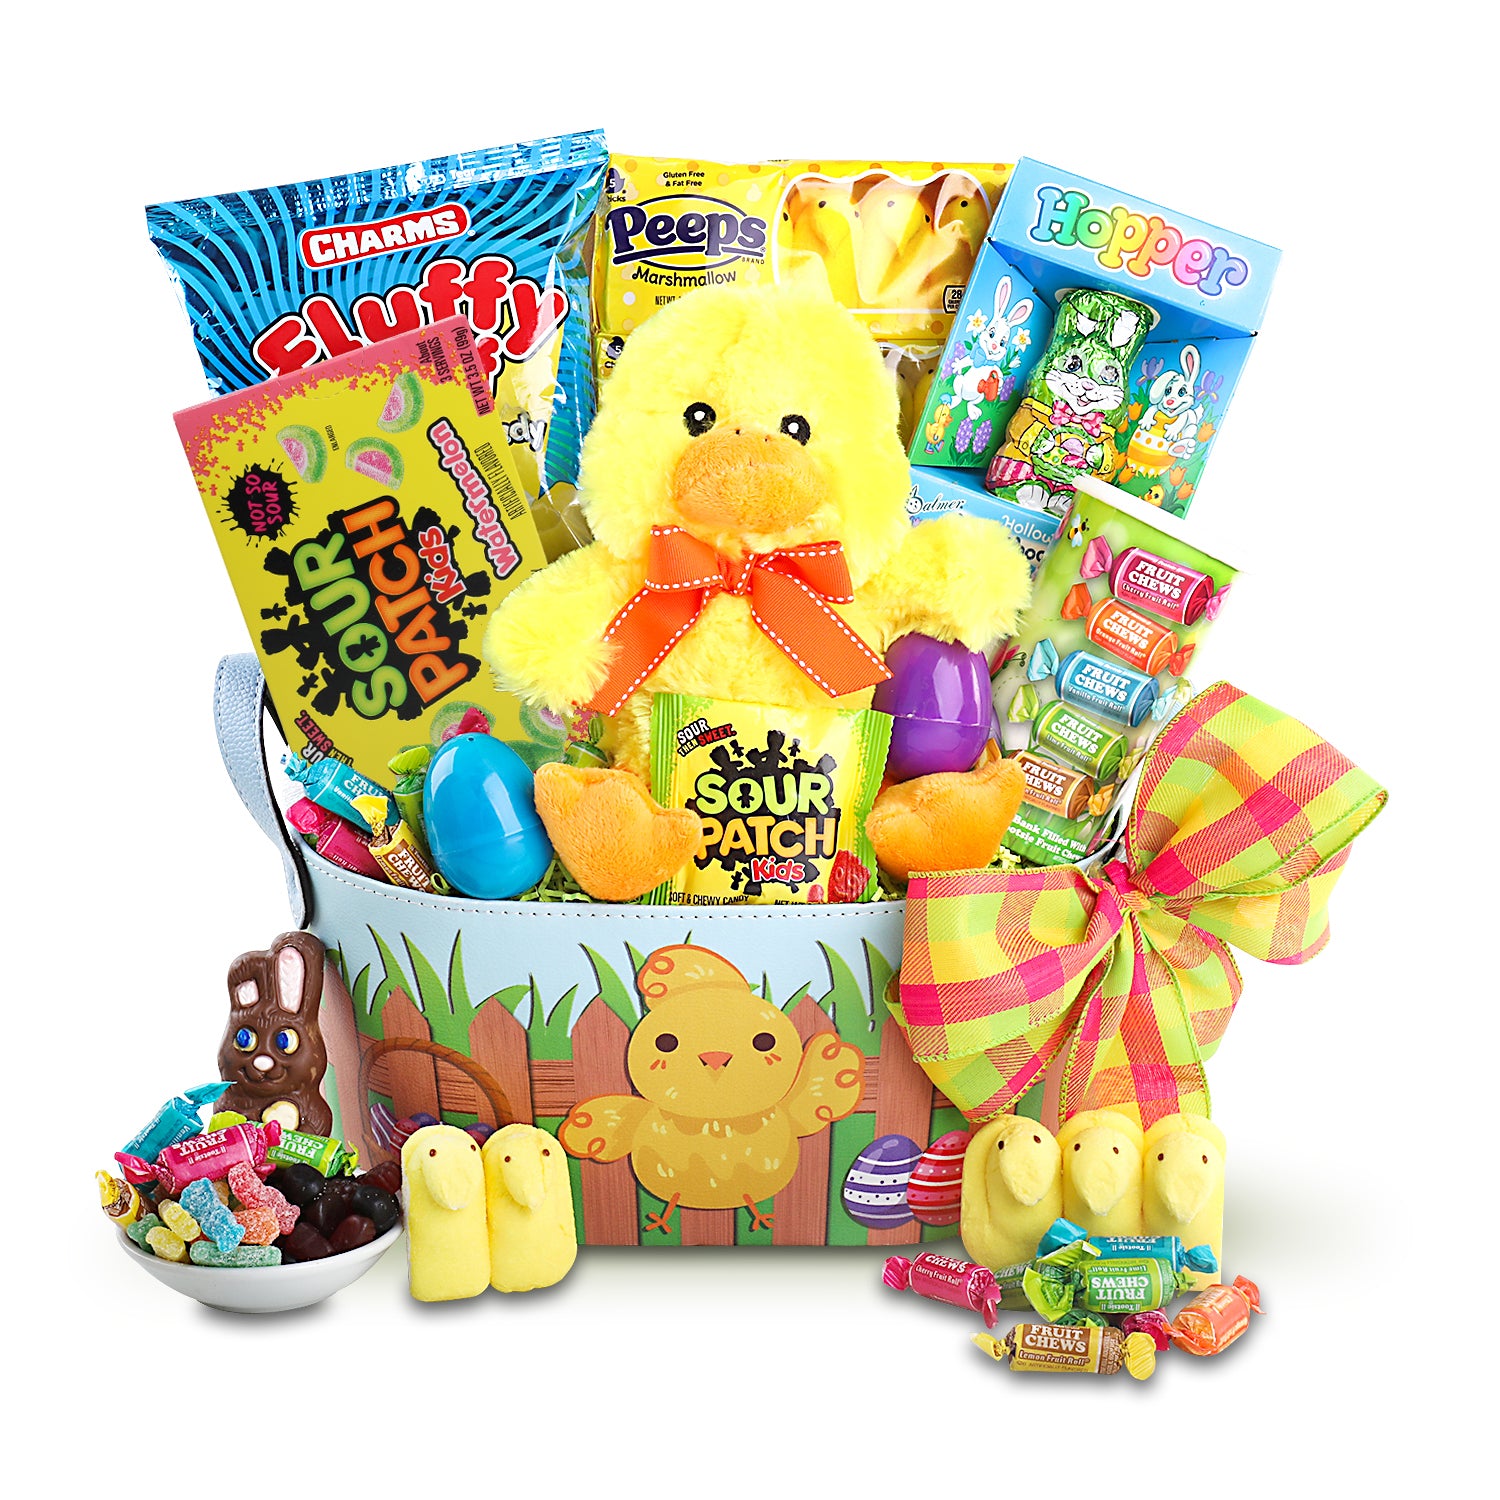 Easter Egg filled with Candy (2), Charms Fluffy Stuff Cotton Candy (2.5oz.), Peeps Yellow Chicks (10ct.), Sour Patch Watermelon (3.5oz.), Tootsie Fruit Chew Bank (4oz.), Sour Patch Kids Fun Size Bag (0.5oz.), Plush Duck, Easter Garden Basket